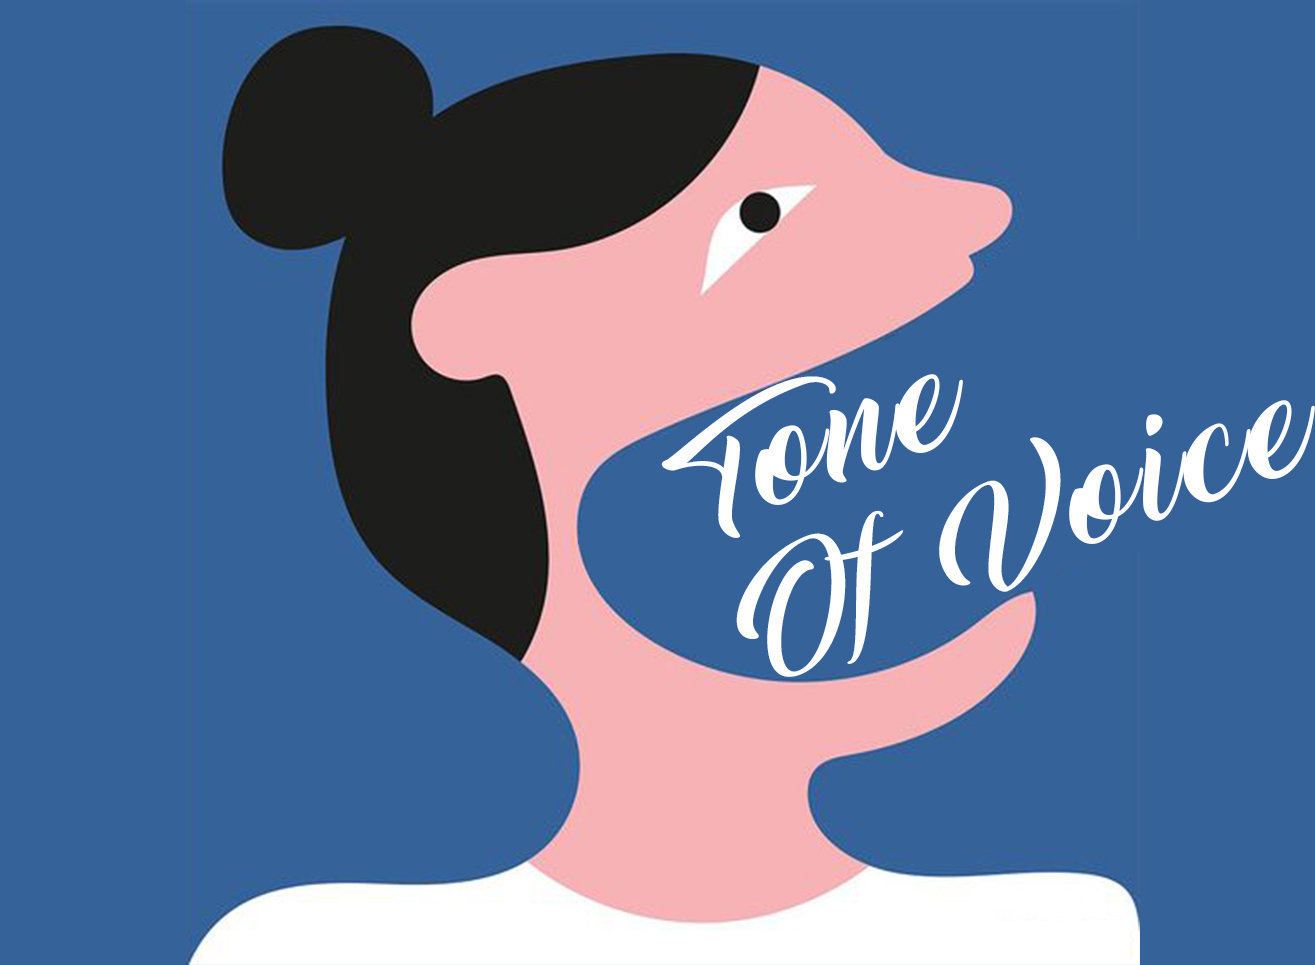 What Is Tone Of Voice Or How To Communicate With Your Customers